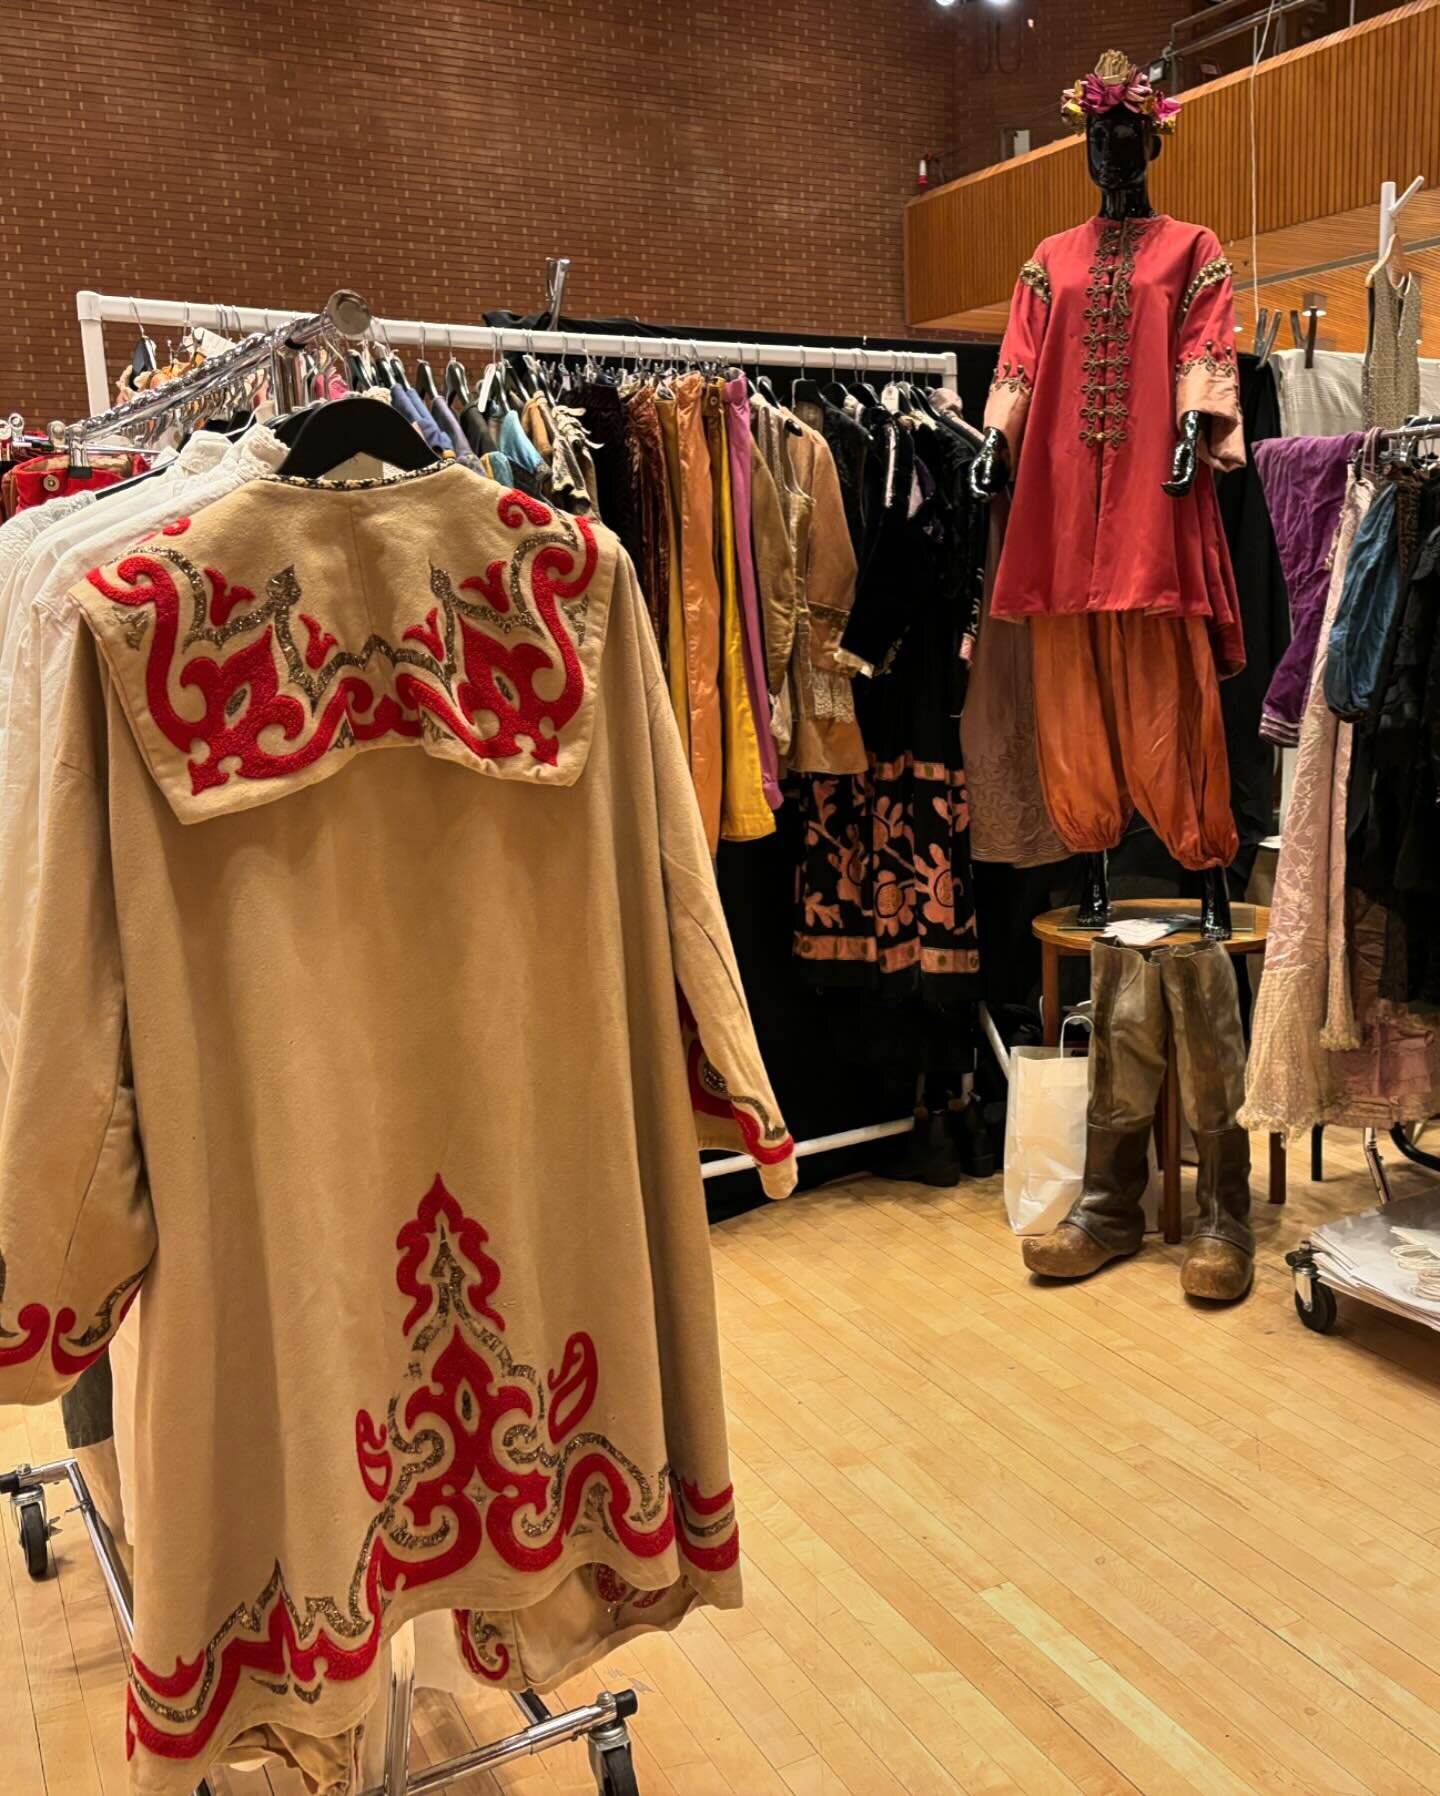 T O D A Y 🎪 Frock Me! Kensington Town Hall March vintage fair | 100 leading dealers | 11am ~ 5.30pm

Please note advance tickets ~now sold out
(limited entry on door if capacity allows)

Kensington Town Hall
Hornton Street W8 7NX
Nearest tube: High 